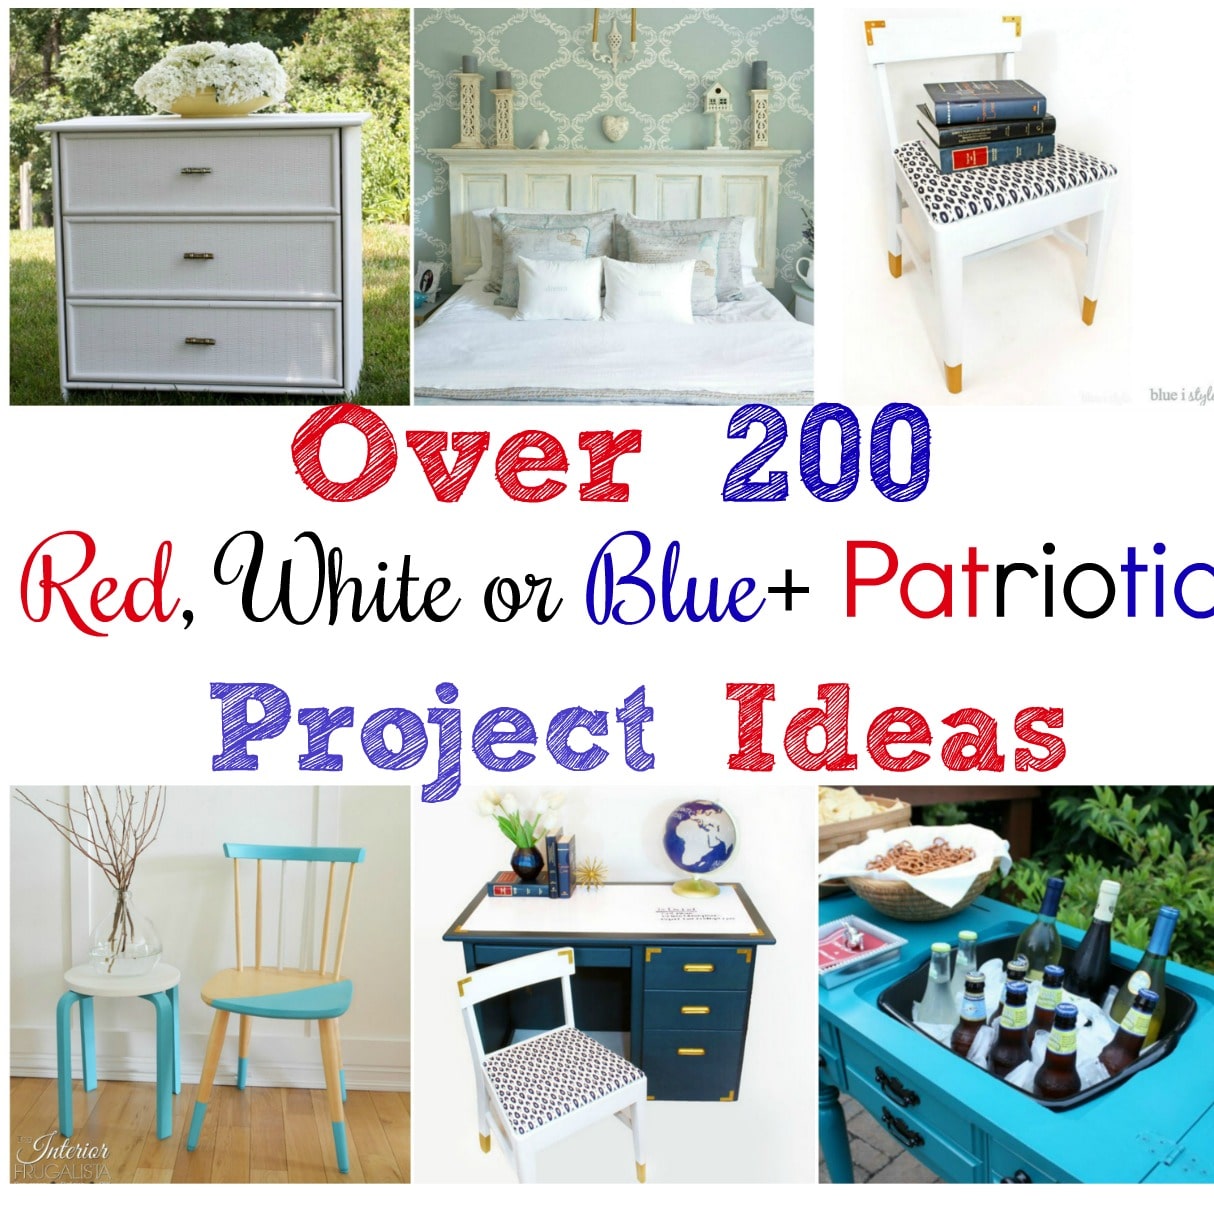 Over 200 Red, White and Blue Plus Patriotic Project Ideas